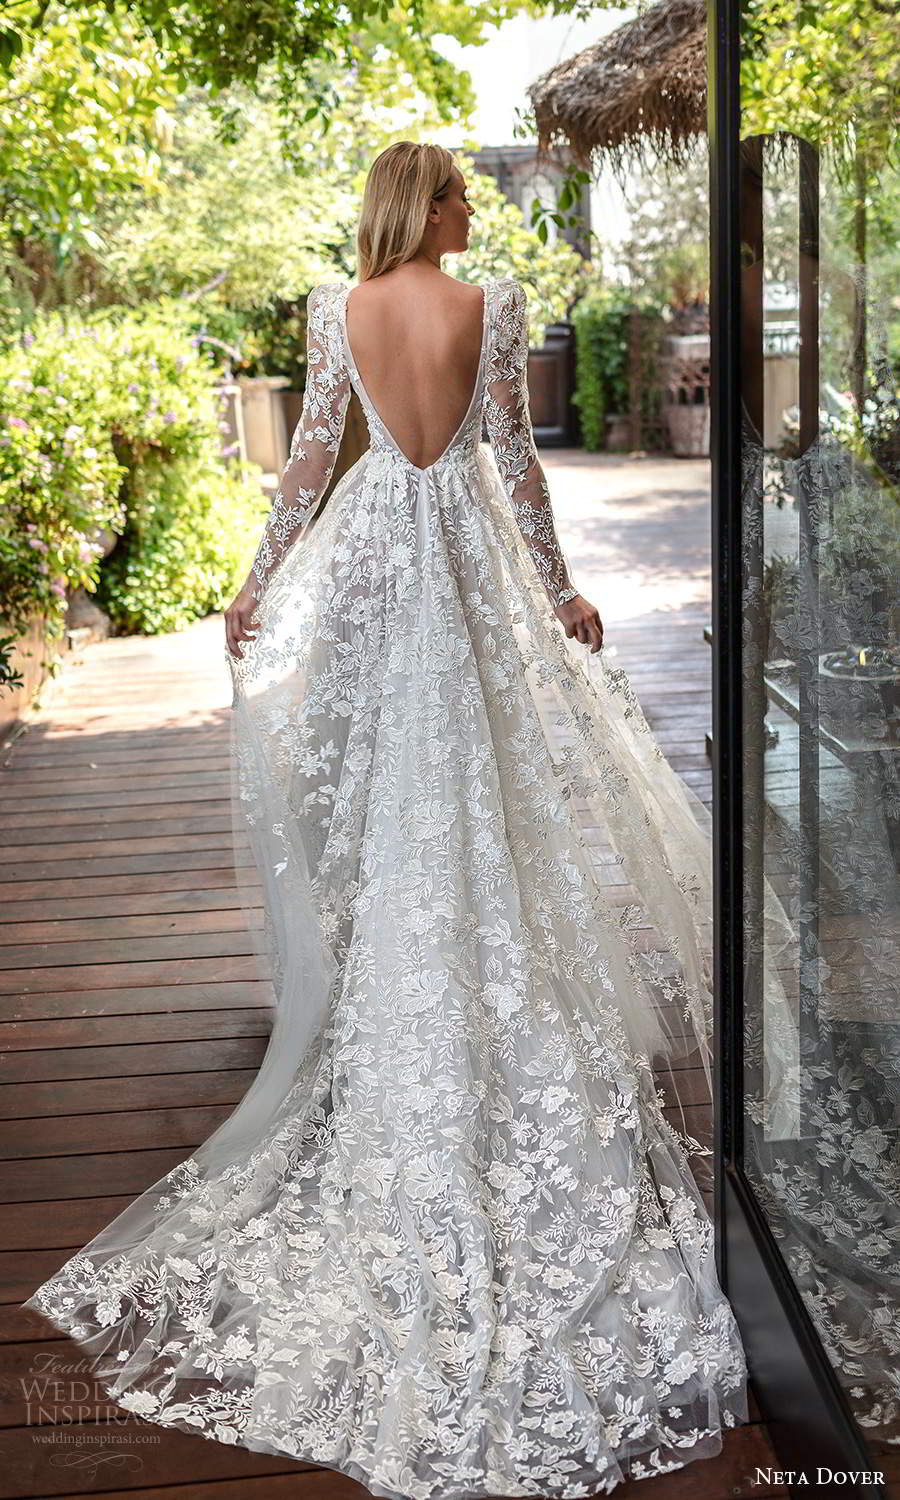 neta dover fall 2020 bridal long puff sleeves plunging v neckline fully embellished a line ball gown wedding dress chapel train (3) bv